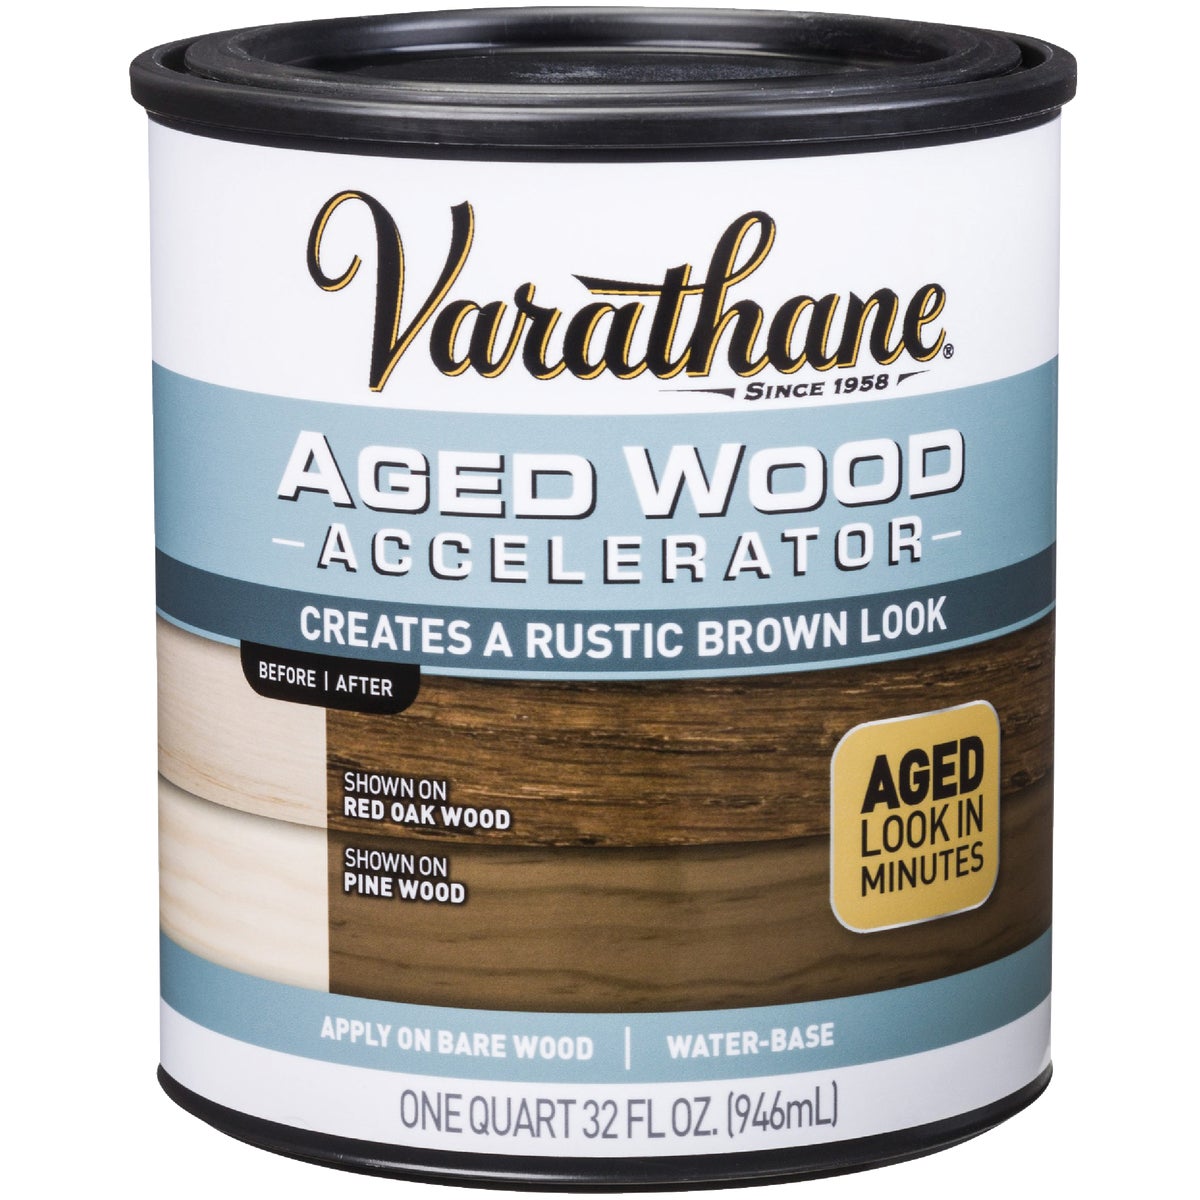 Varathane Aged Wood Accelerator Stain, Brown, 1 Qt.